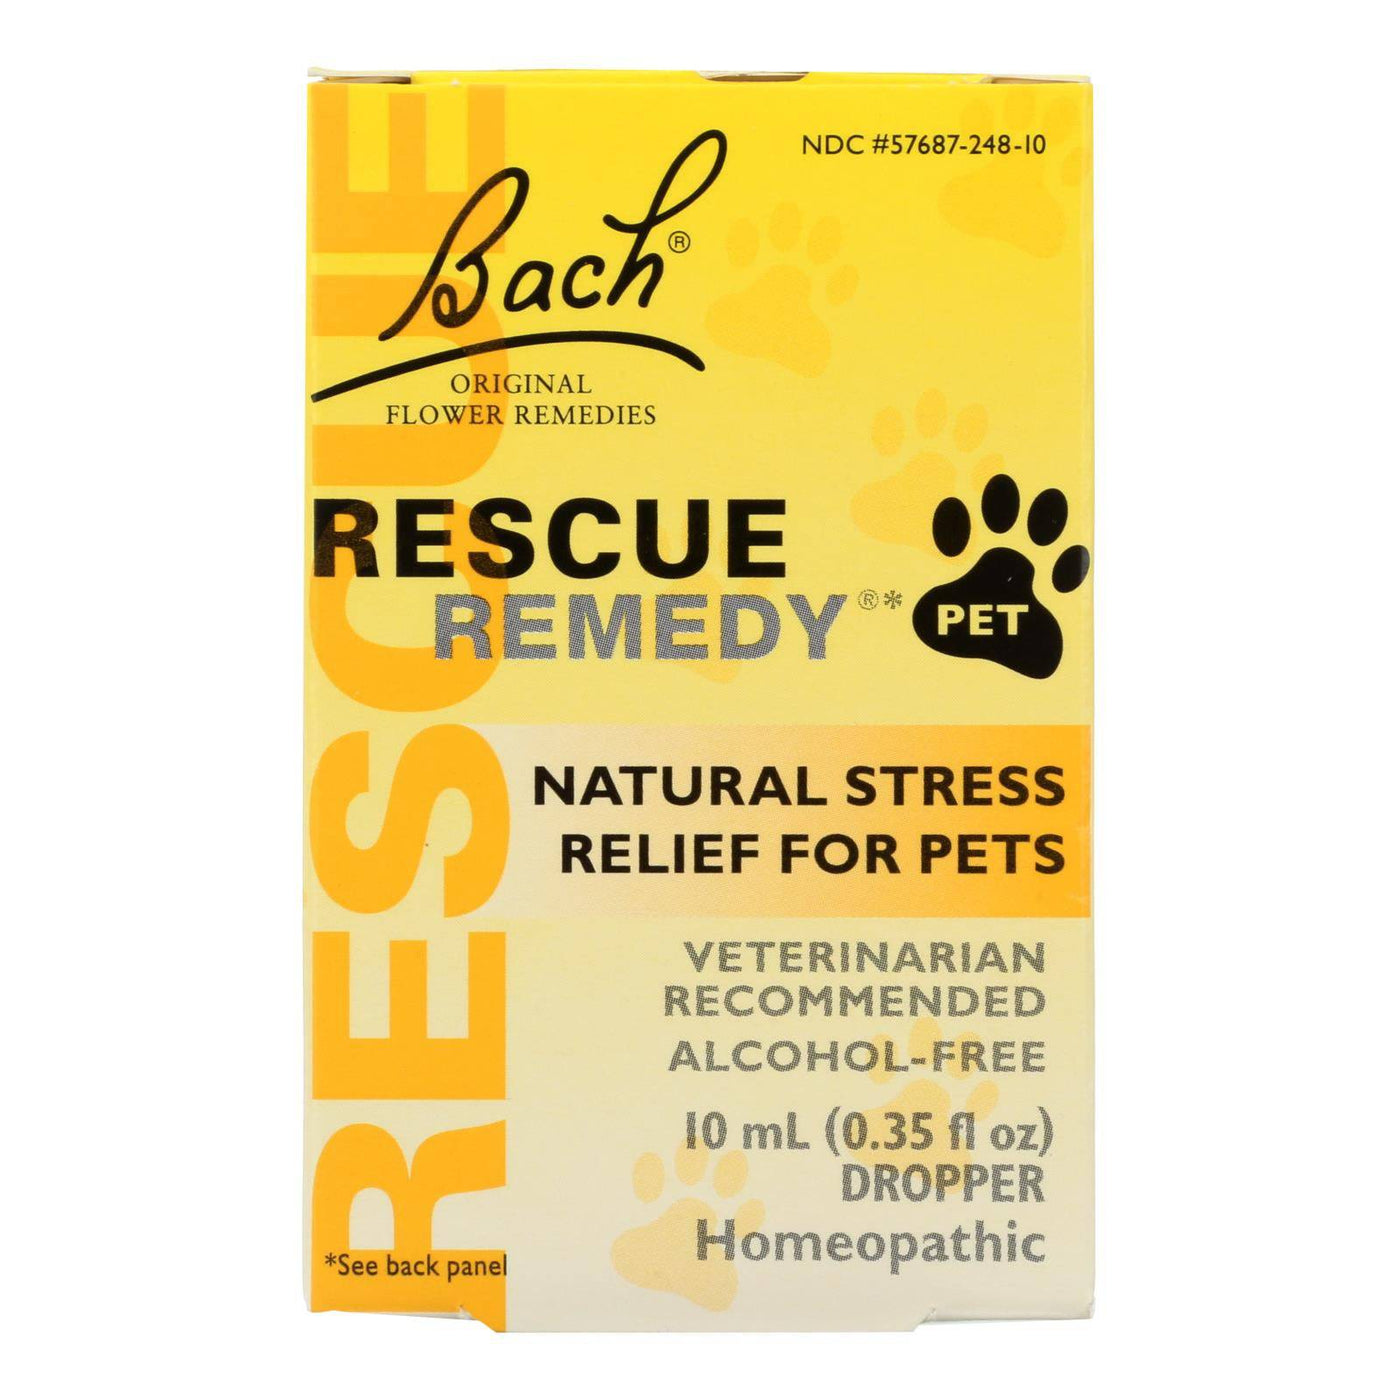 Buy Bach Flower Remedies Rescue Remedy Stress Relief For Pets - 10 Ml  at OnlyNaturals.us